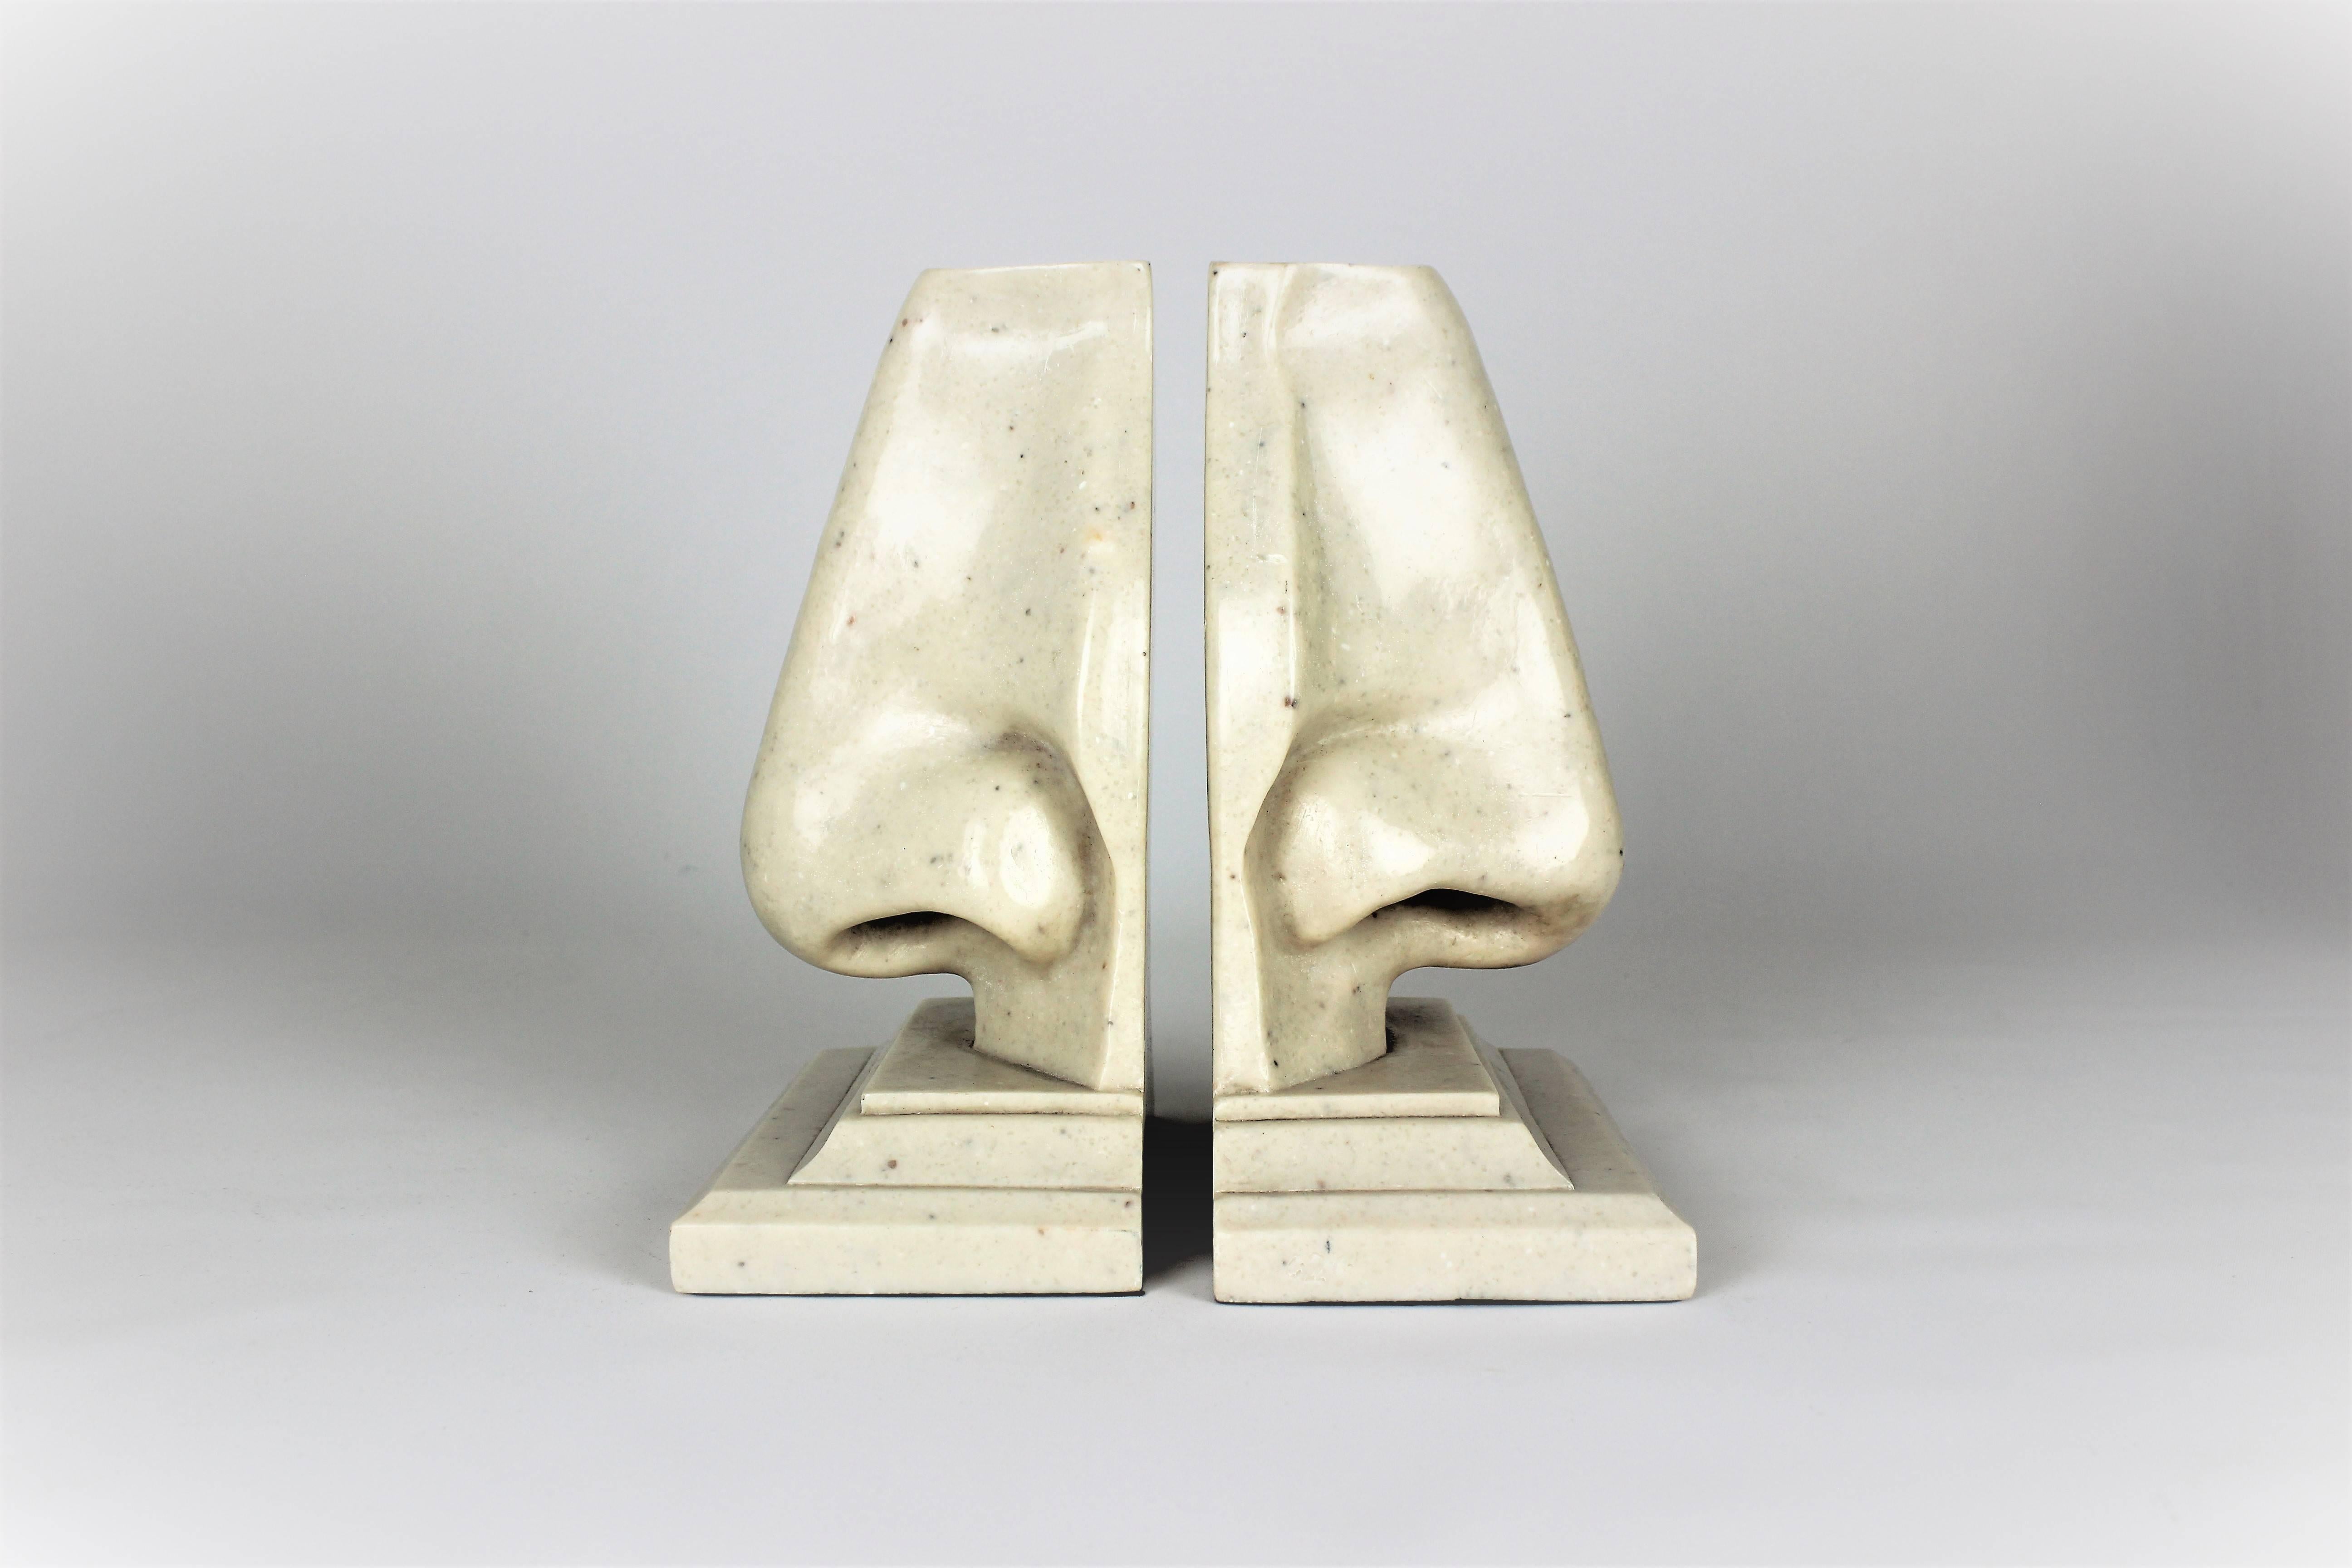 Large surrealist pop art marble nose bookends, Italy, 1970s. Perfect condition. What a fun decorative object! Very much in the style of Piero Fornasetti and Salvador Dali. 

See this item in our private NYC showroom! Refine Limited is located in the